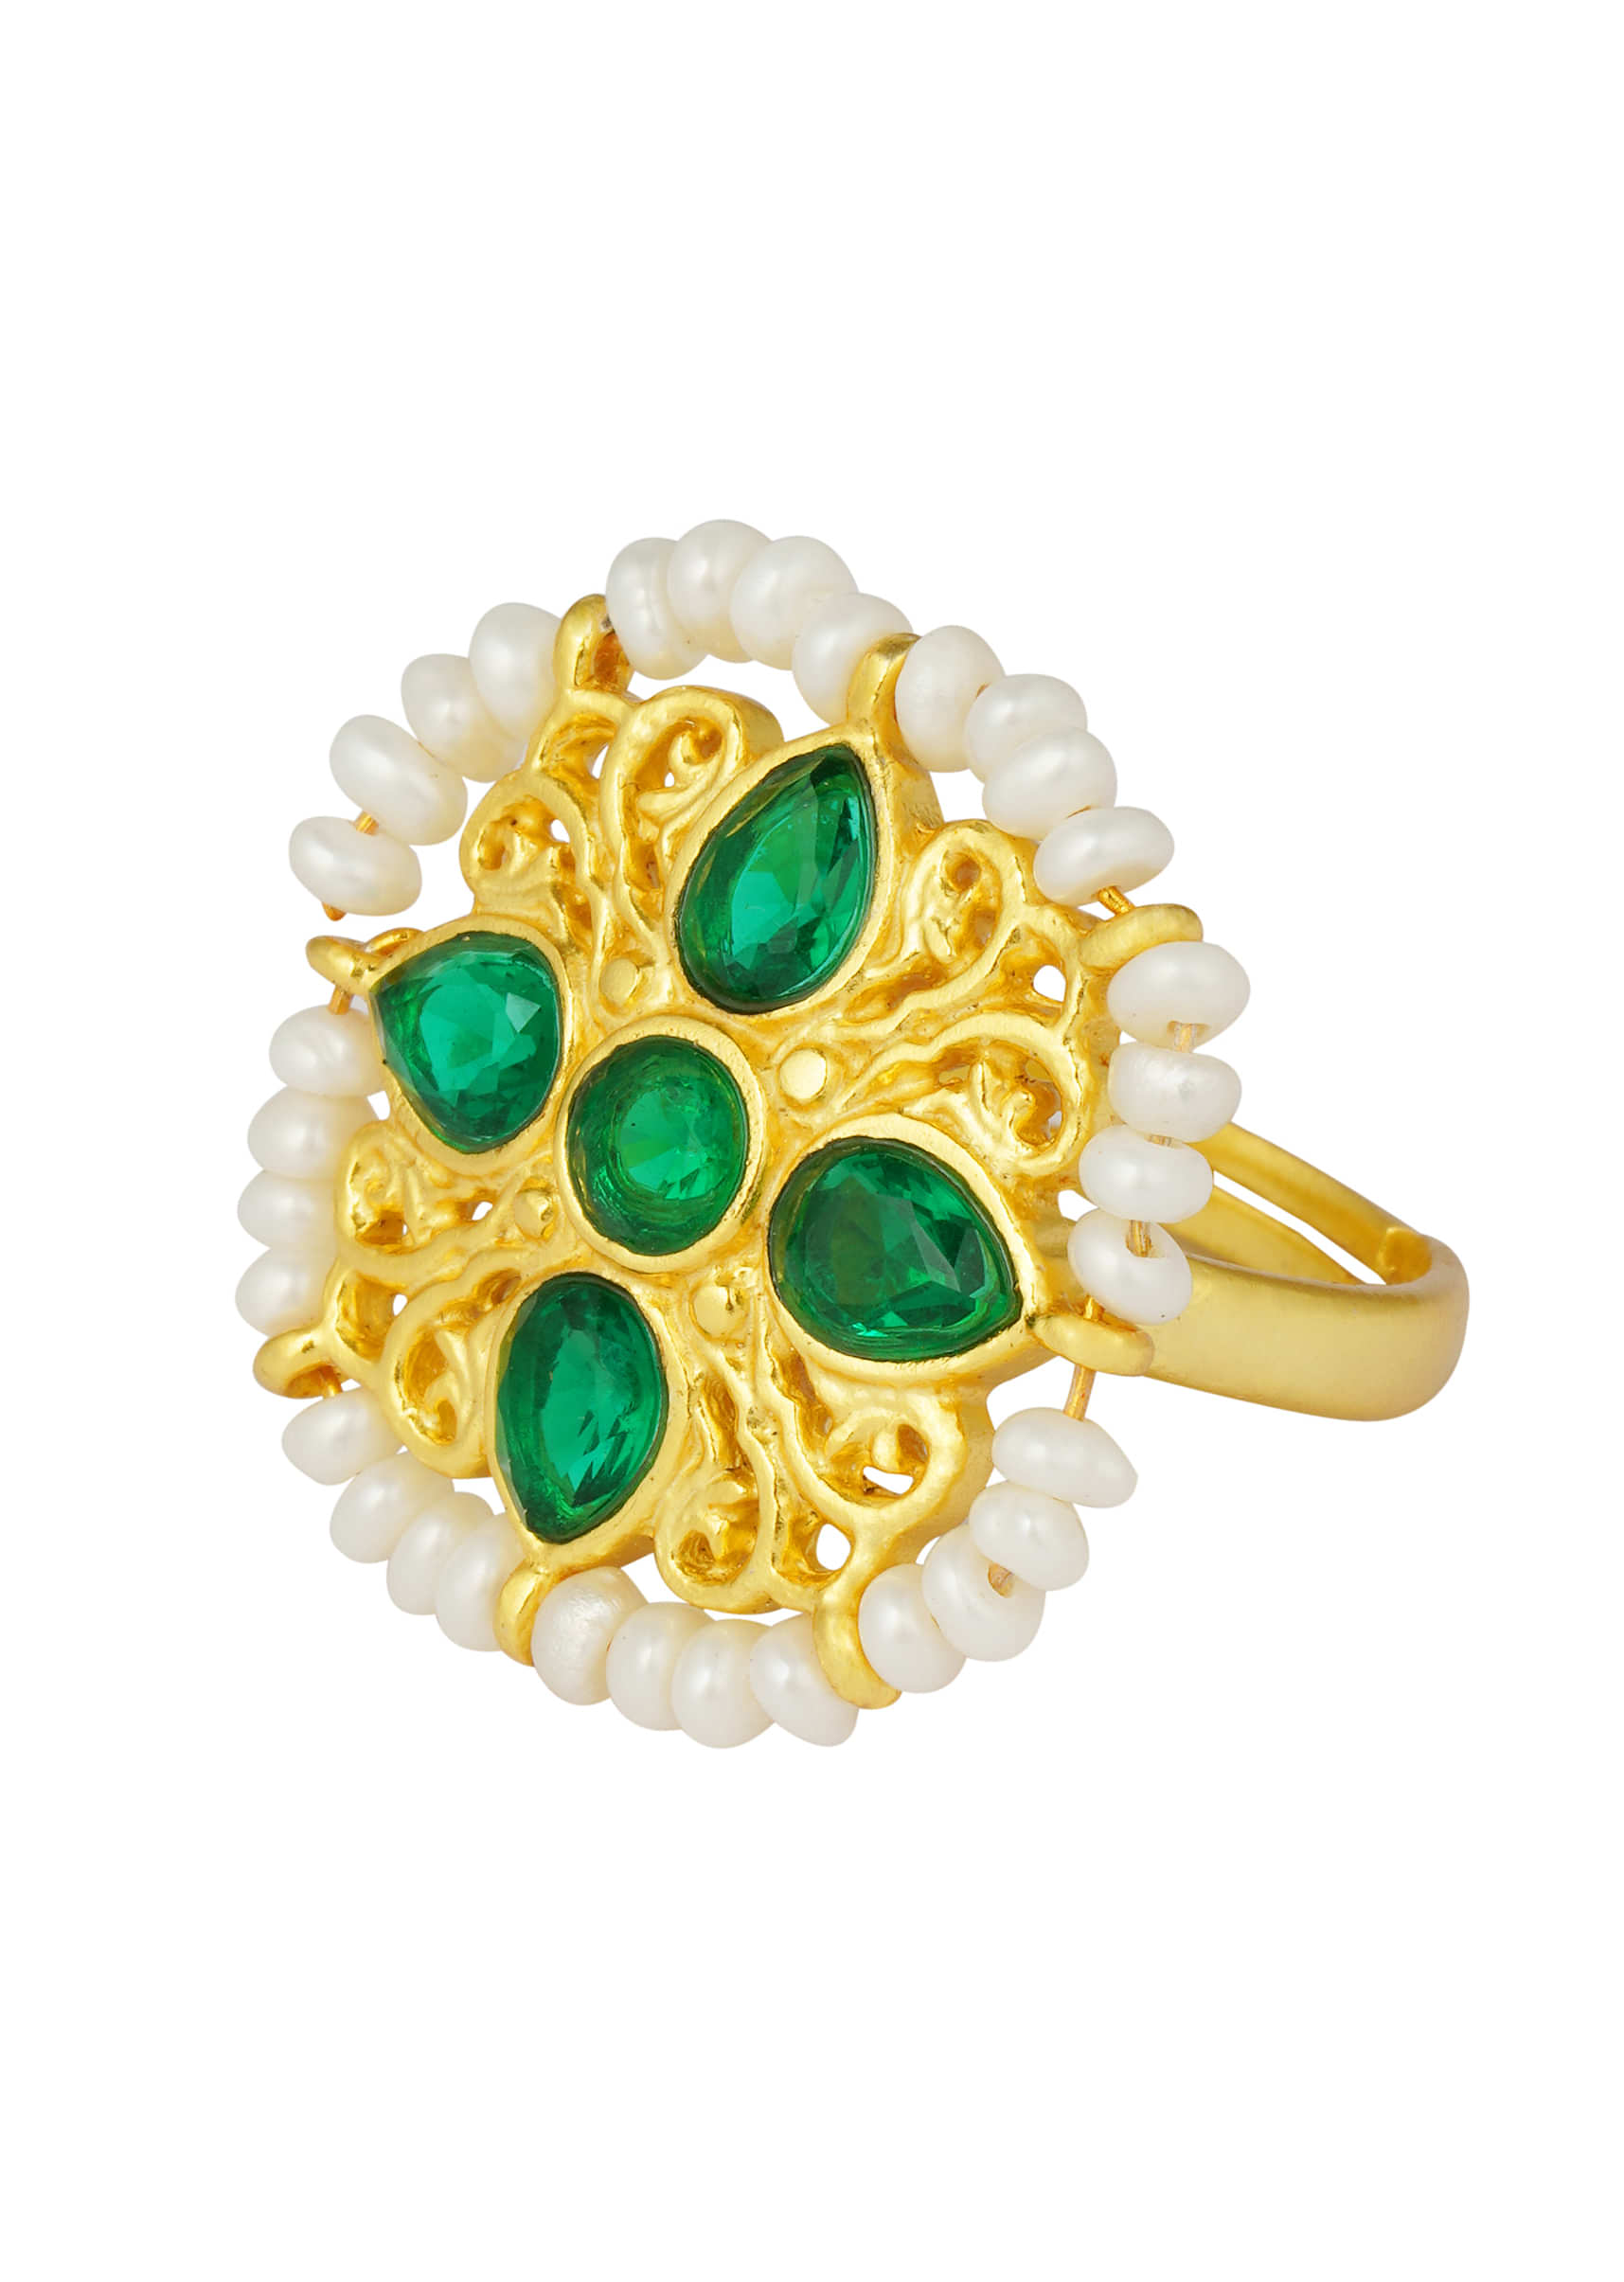 Green Stone Studded Ring In Four Petal Design With Pearls Around The Edge By Zariin